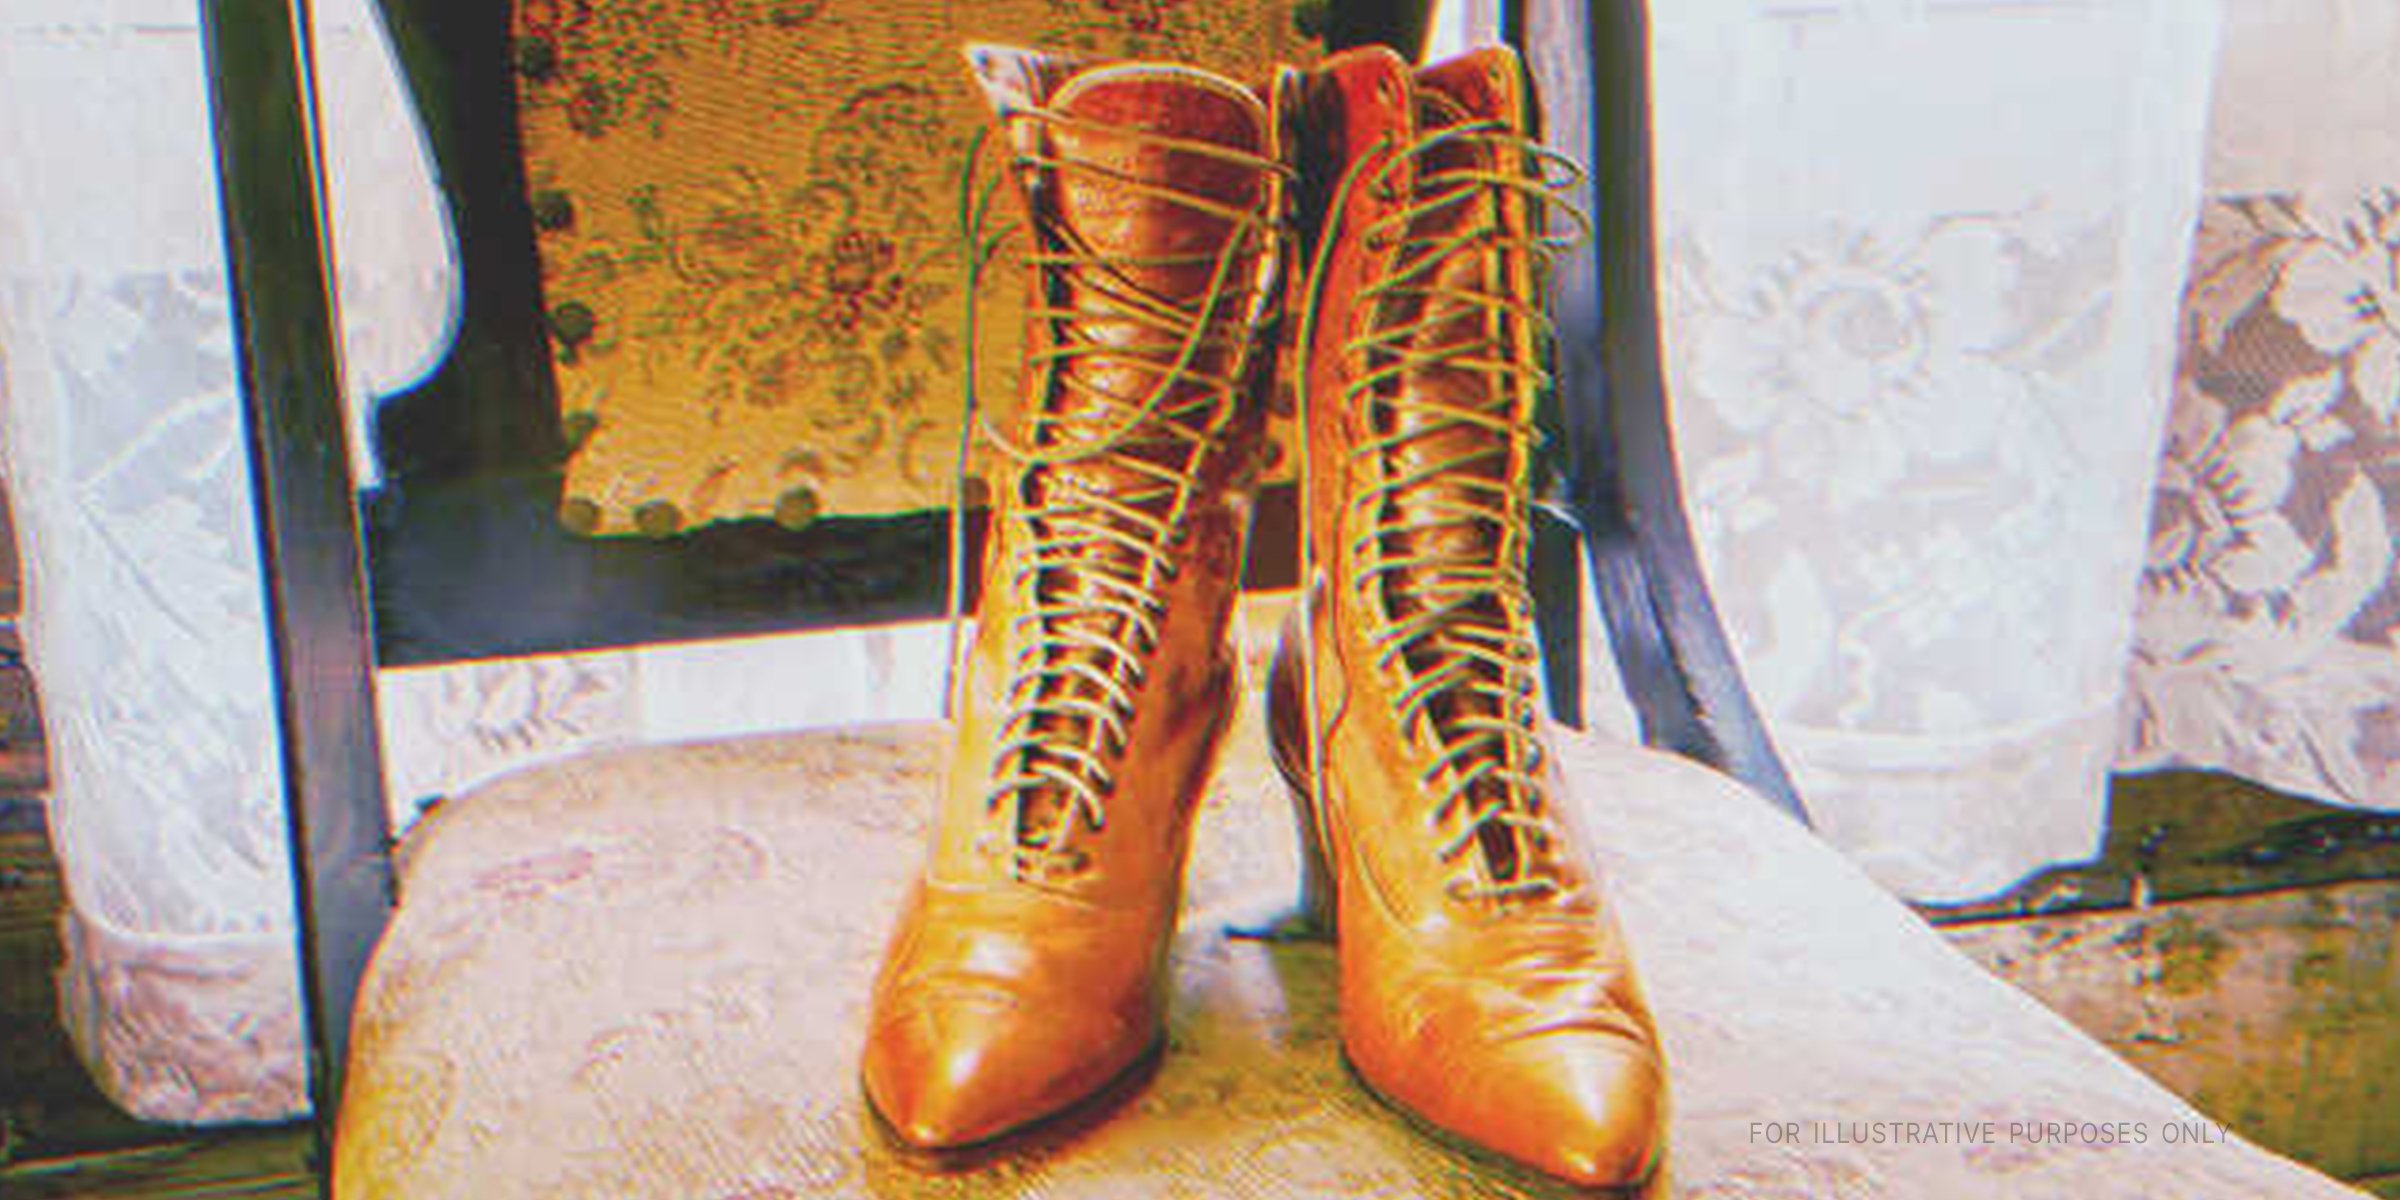 A pair of boots | Source: Shutterstock